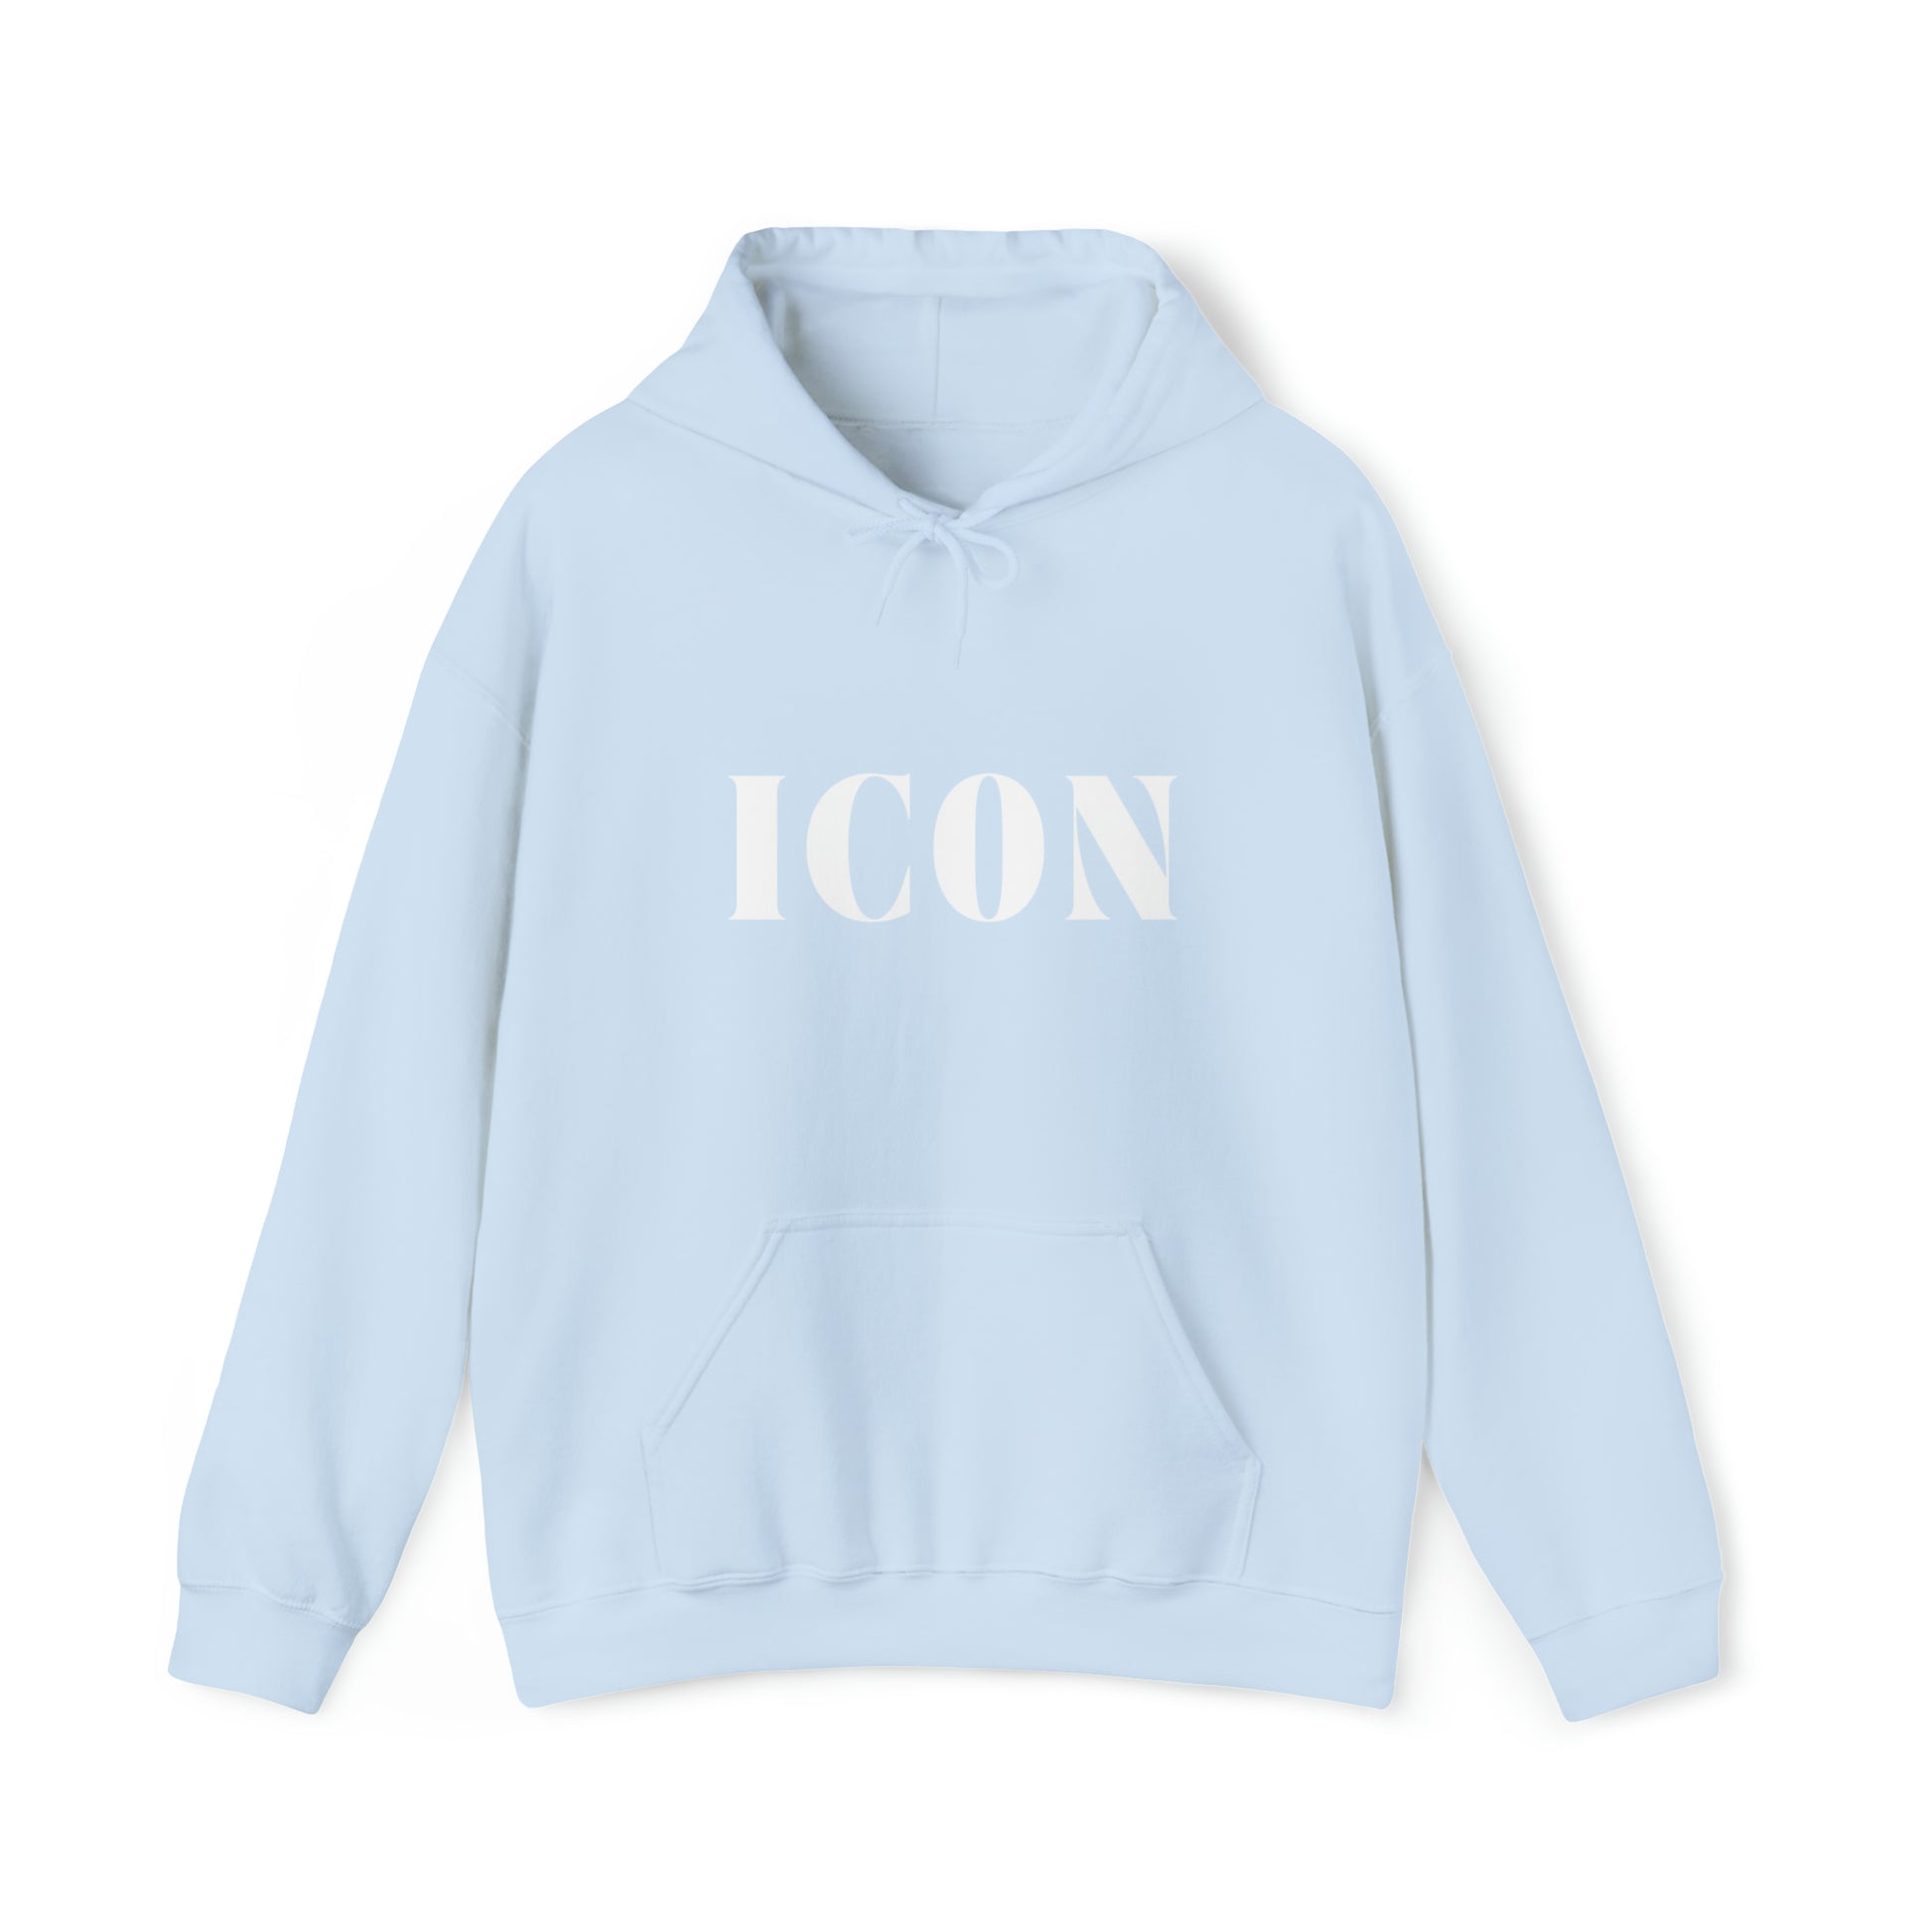 S Light Blue Icon Hoodie from HoodySZN.com